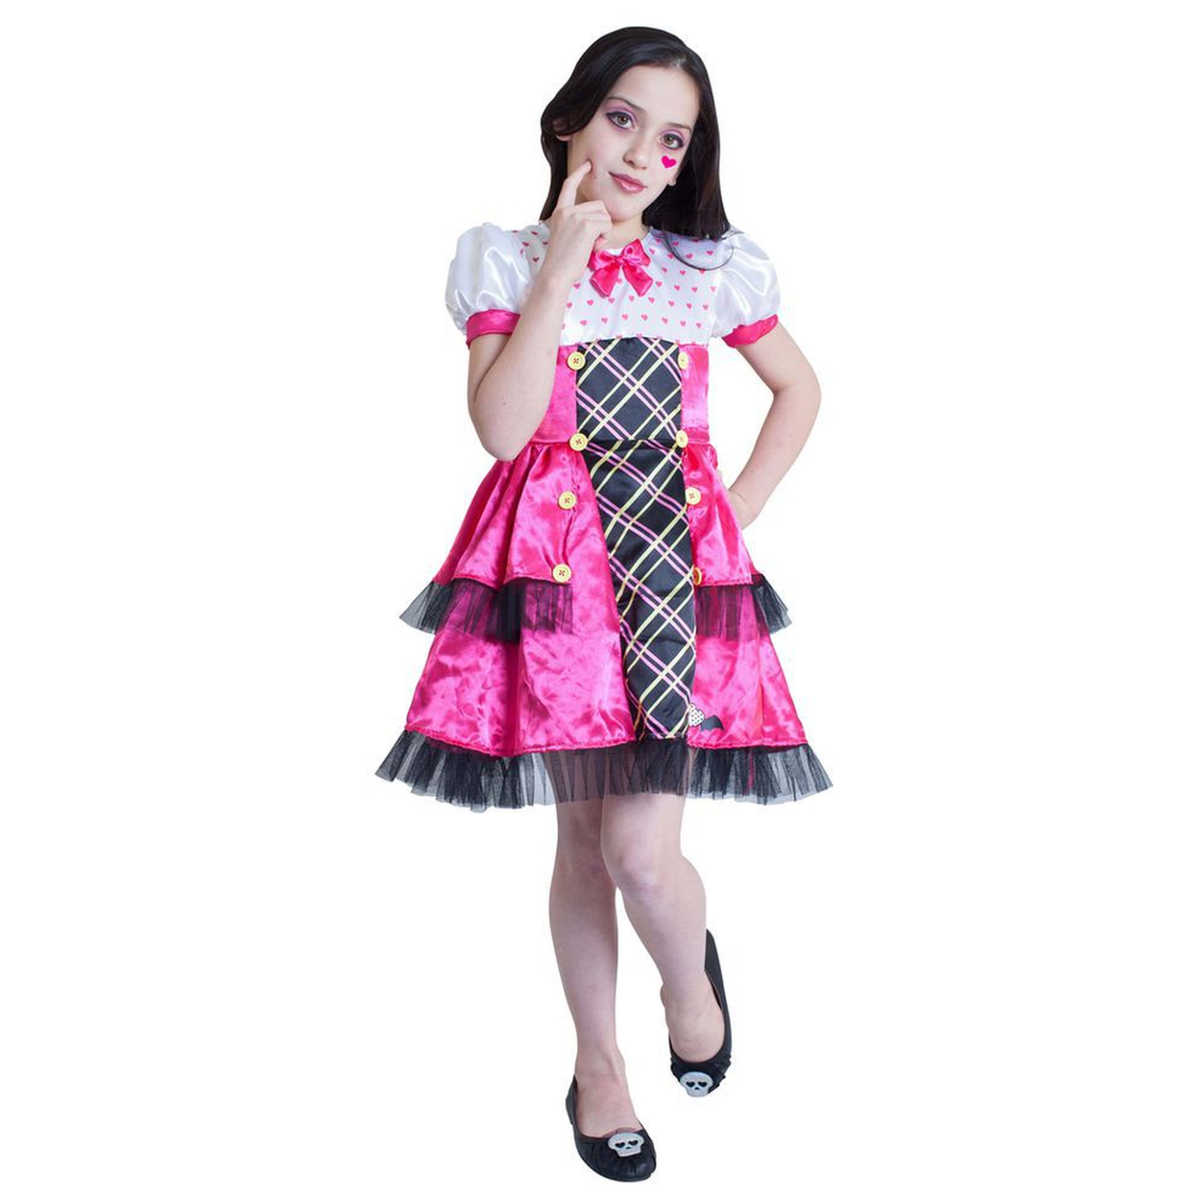 29+ Monster high costumes diy ideas in 2022 